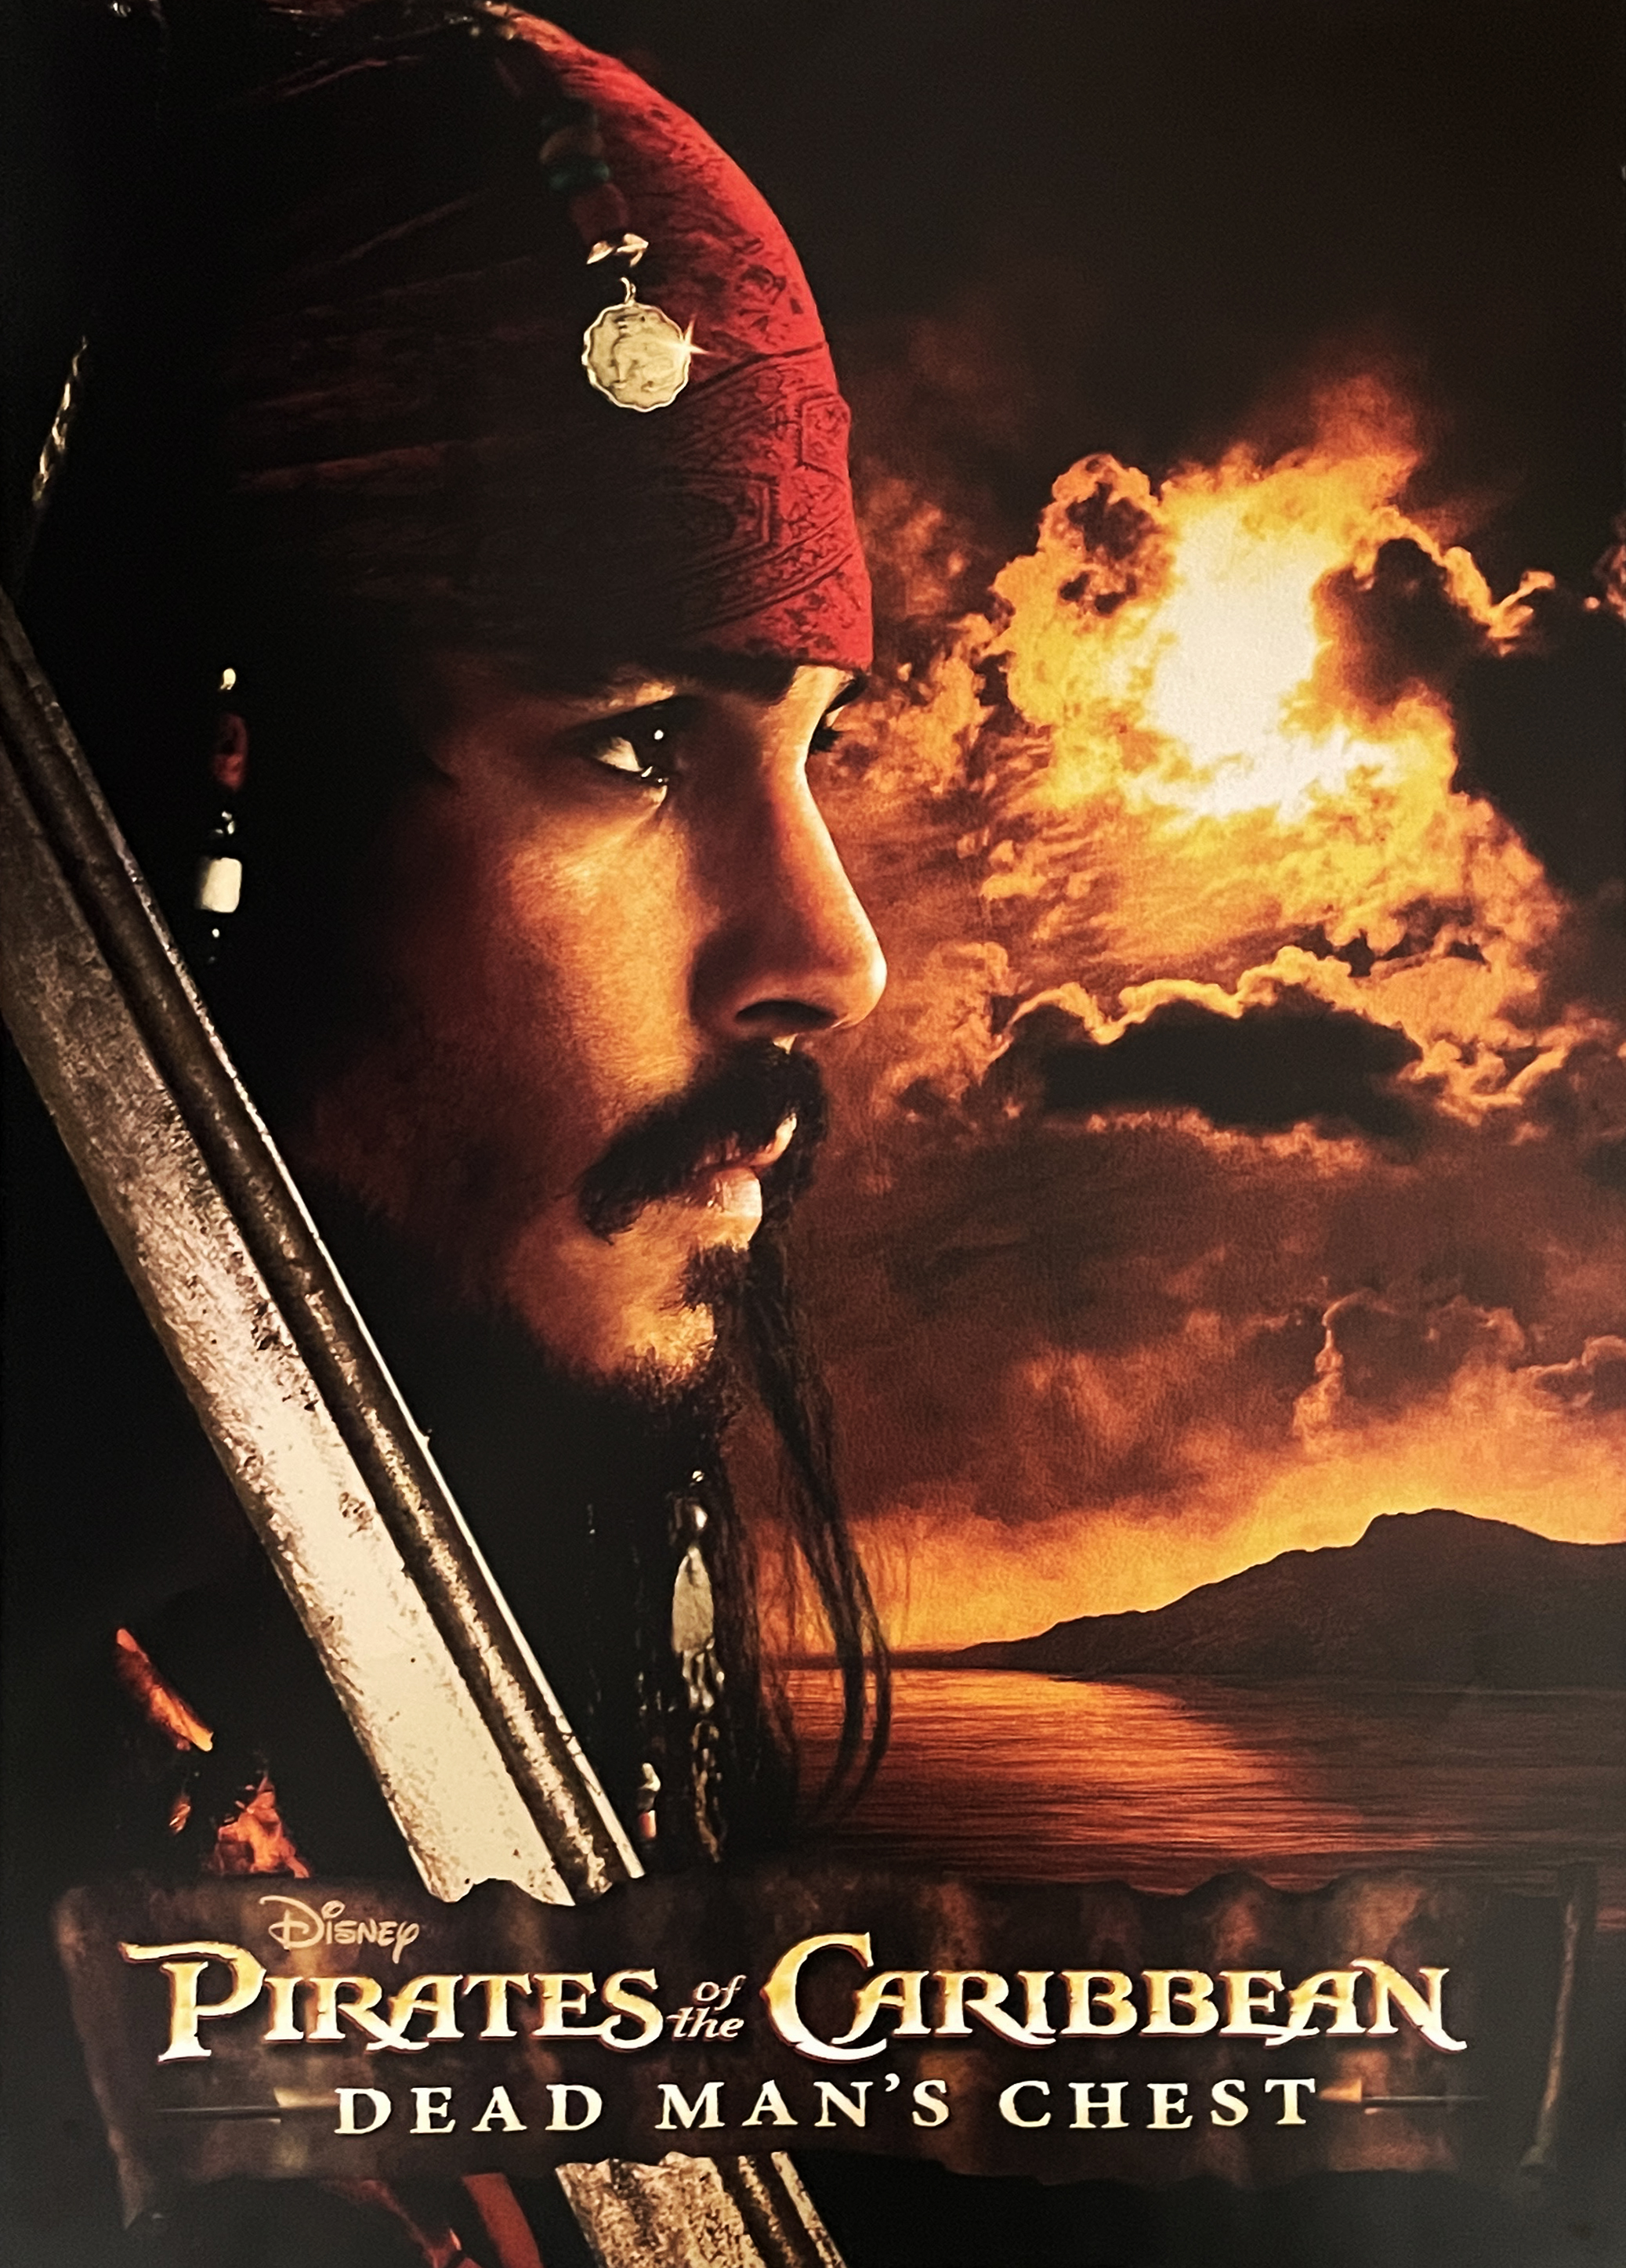 Pirates of the Caribbean - Dead Man's Chest - Johnny Depp